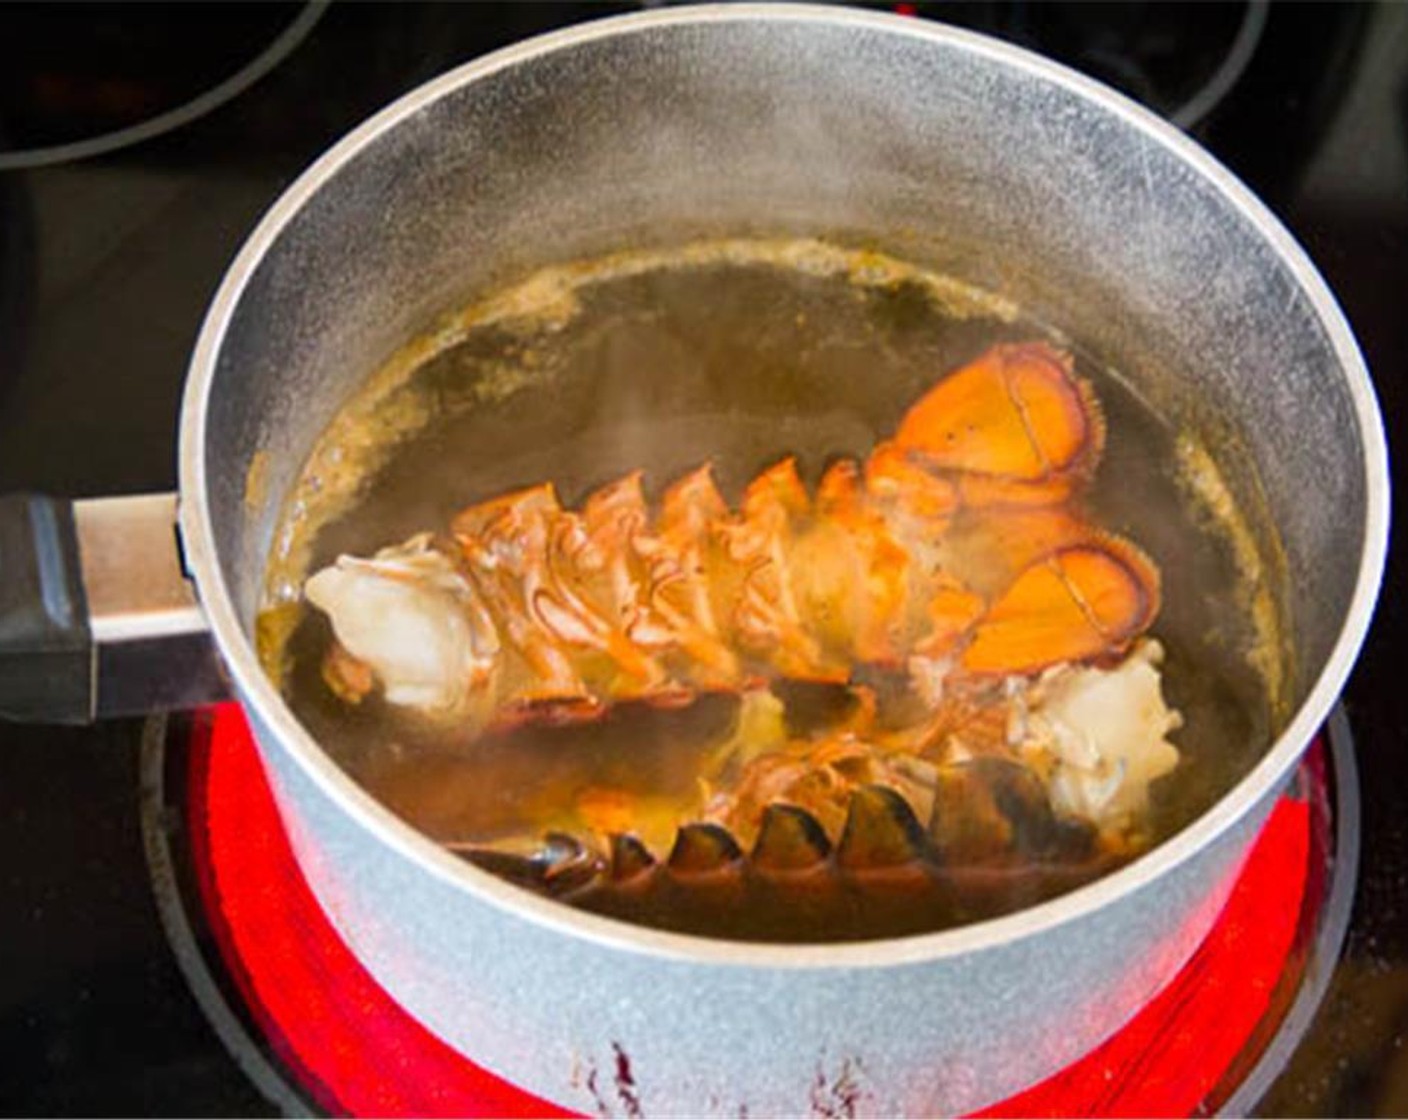 step 1 In medium saucepan, bring 3 cups of water to a boil. Reduce the heat to medium low and add Lobster Tails (8 oz), Salt (1 tsp) and Old Bay® Seasoning (1 tsp). Simmer for 8-10 minutes, until the shell turns pink and the meat is opaque.